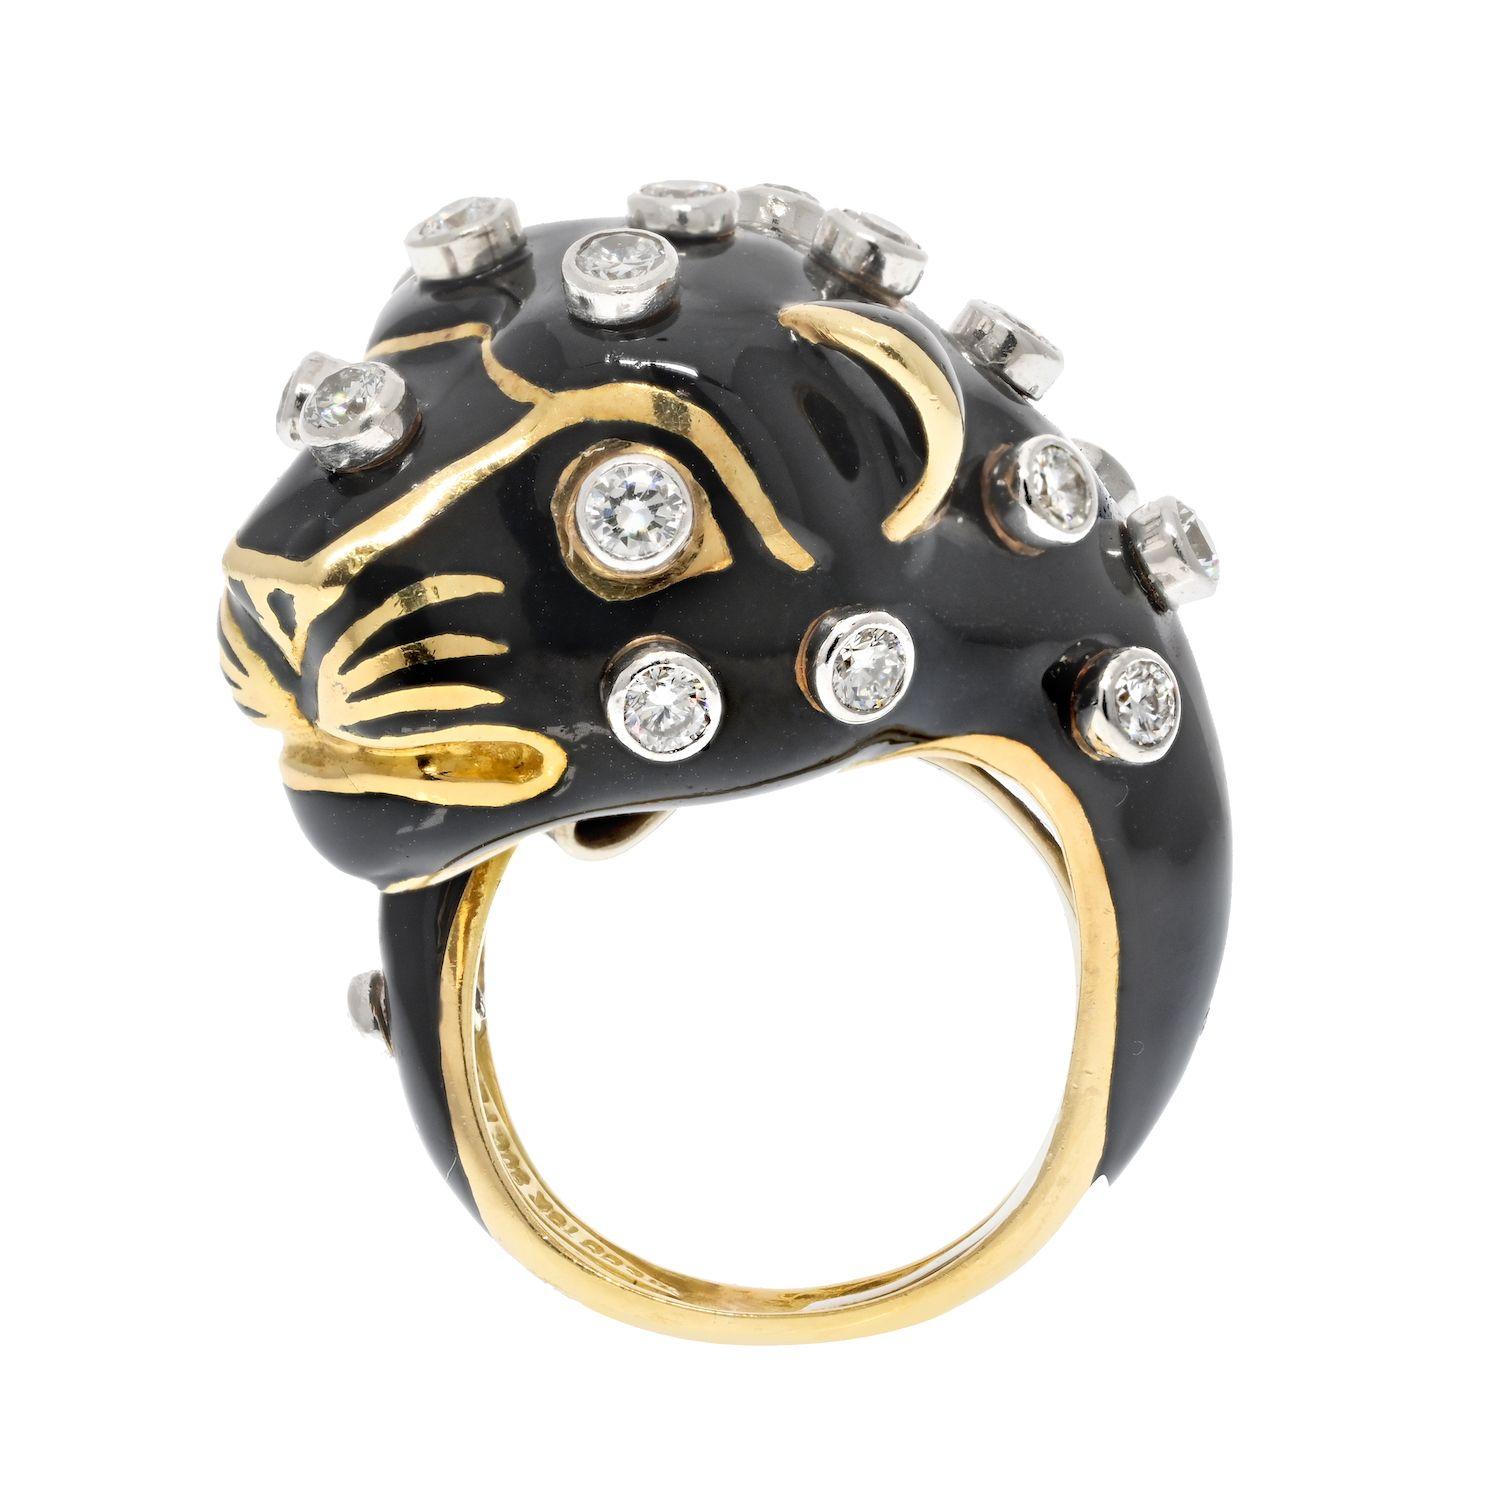 The leopard-shaped fashion ring made by David Webb is a stunning piece of jewelry that showcases both his design expertise and craftsmanship. The cocktail ring is crafted from 18k yellow gold and is covered by black enamel, giving it a sleek and